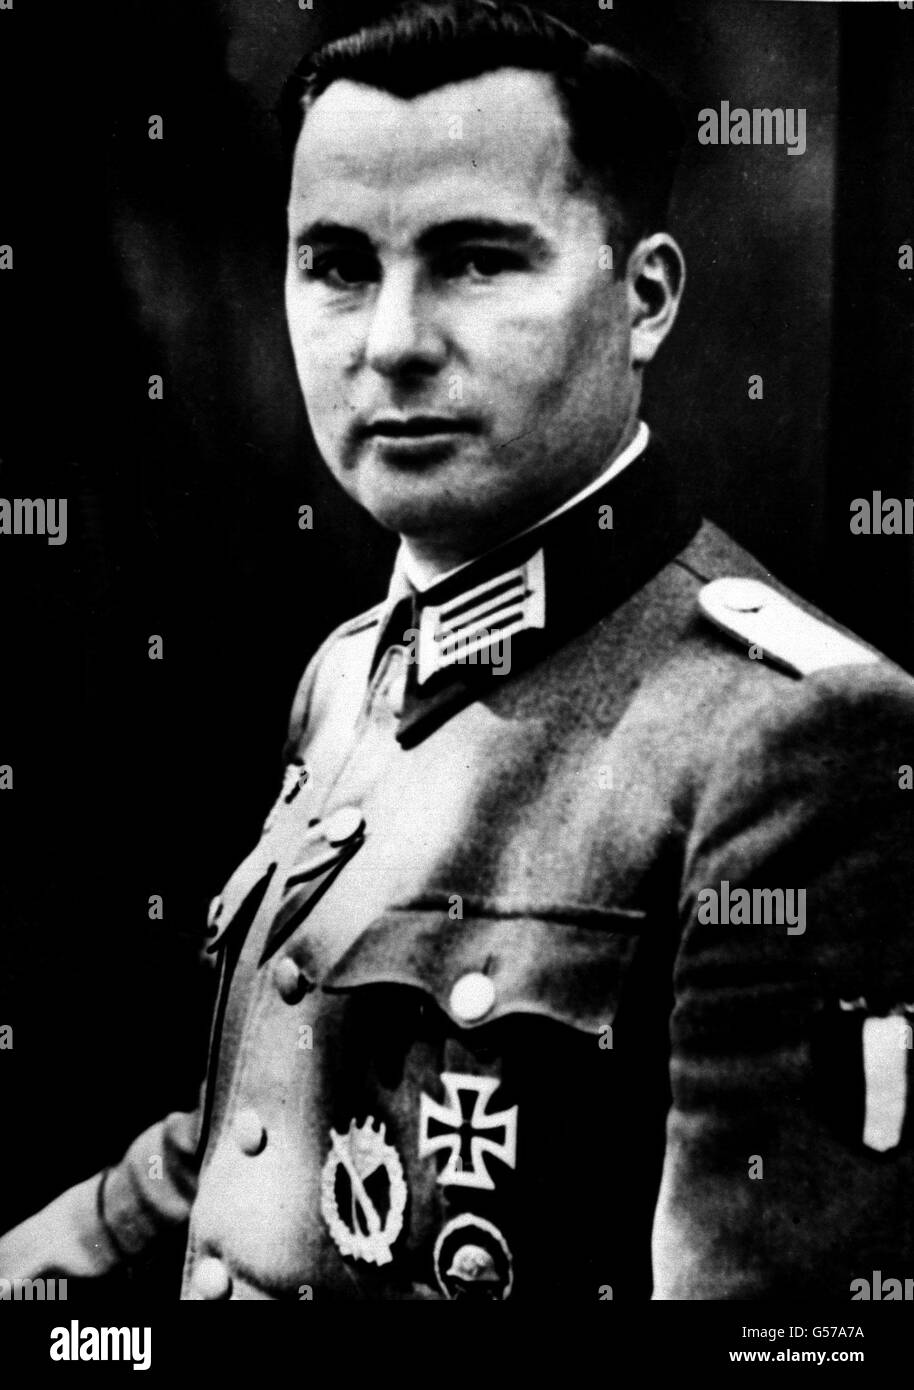 LEON DEGRELLE : A wartime portrait of Belgian collaborator Leon Degrelle in German uniform. Degrelle, leader of the Belgian Rexist Movement, was condemned to death in absentia after the war. He both founded and led a Belgian Waffen SS Brigade known as 'Wallonien'. Stock Photo